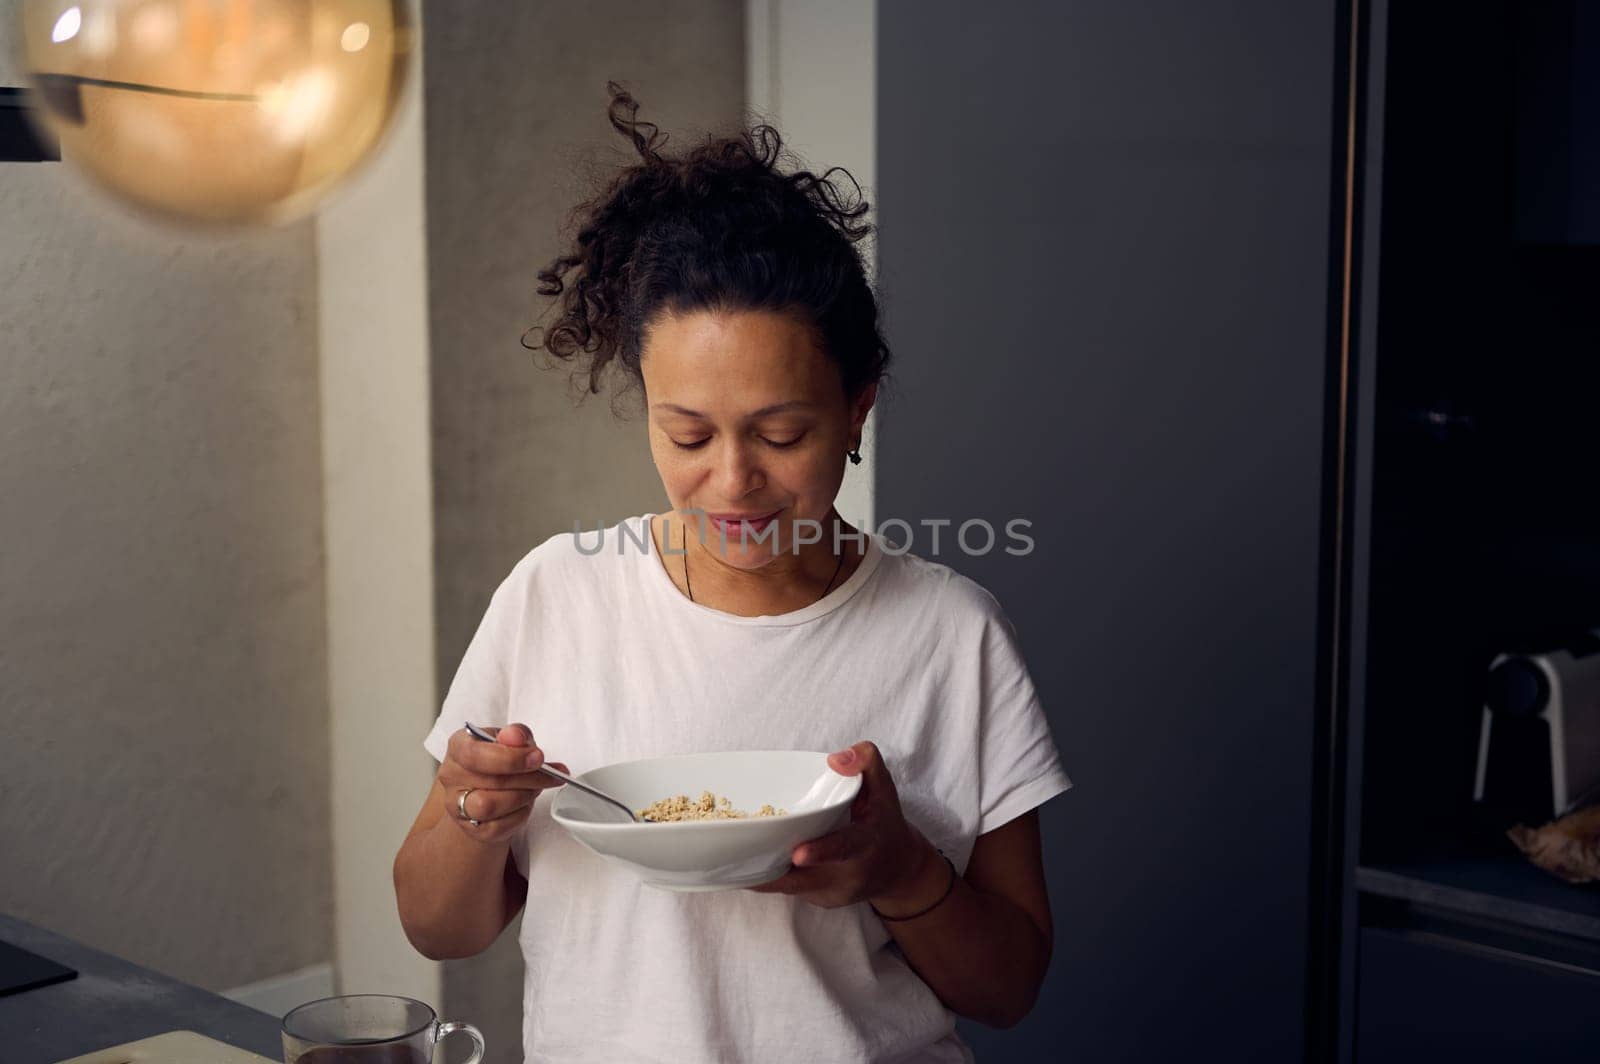 Young curly haired pretty woman in white t-shirt, holding a bowl of muesli, standing at kitchen counter at home. People. Food consumerism. Diet and slimming concept. Healthy lifestyle